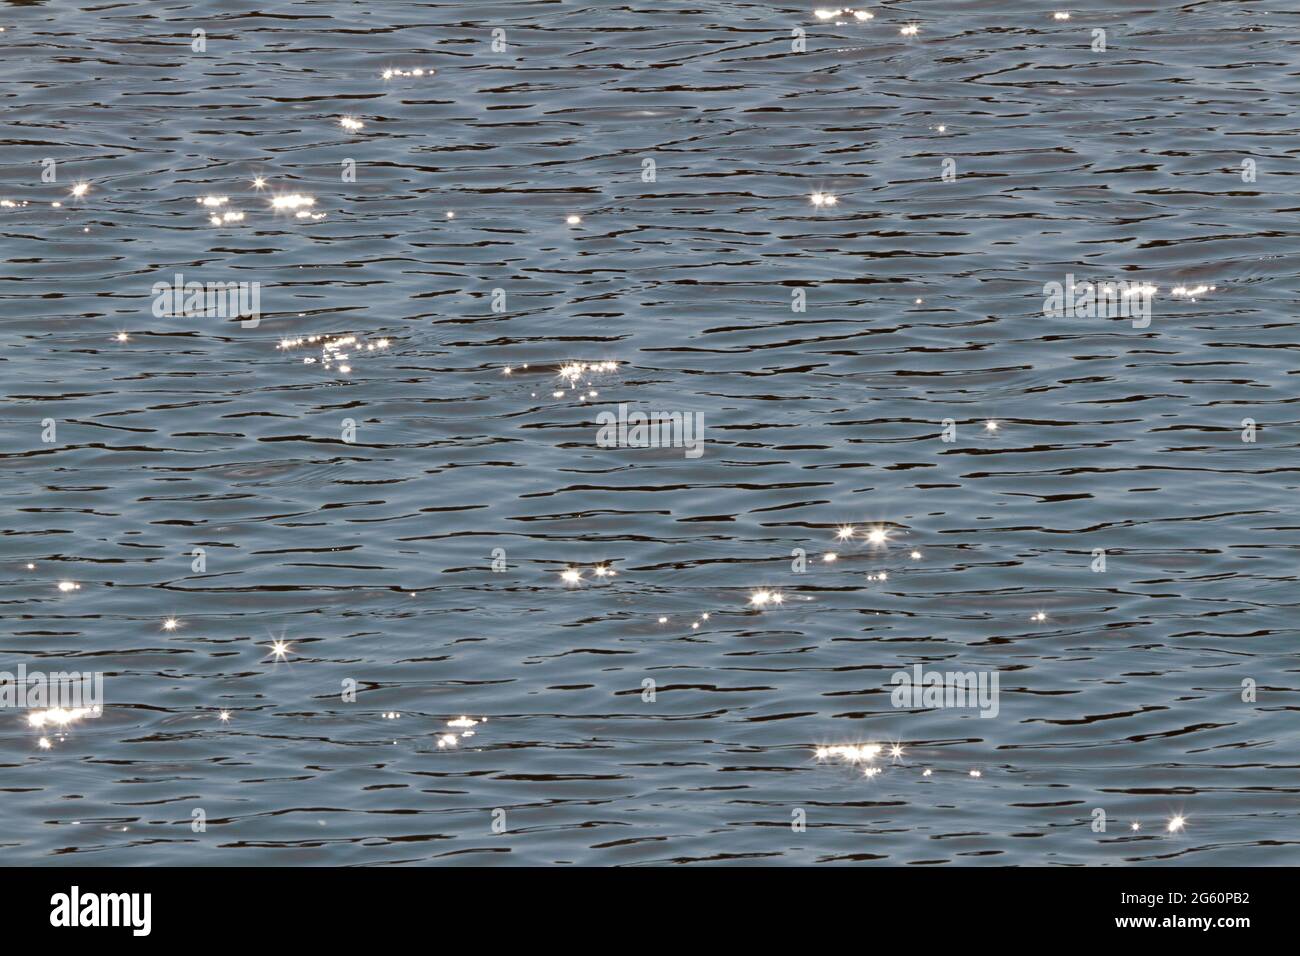 Sunlight glistens on the rippling water. Stock Photo